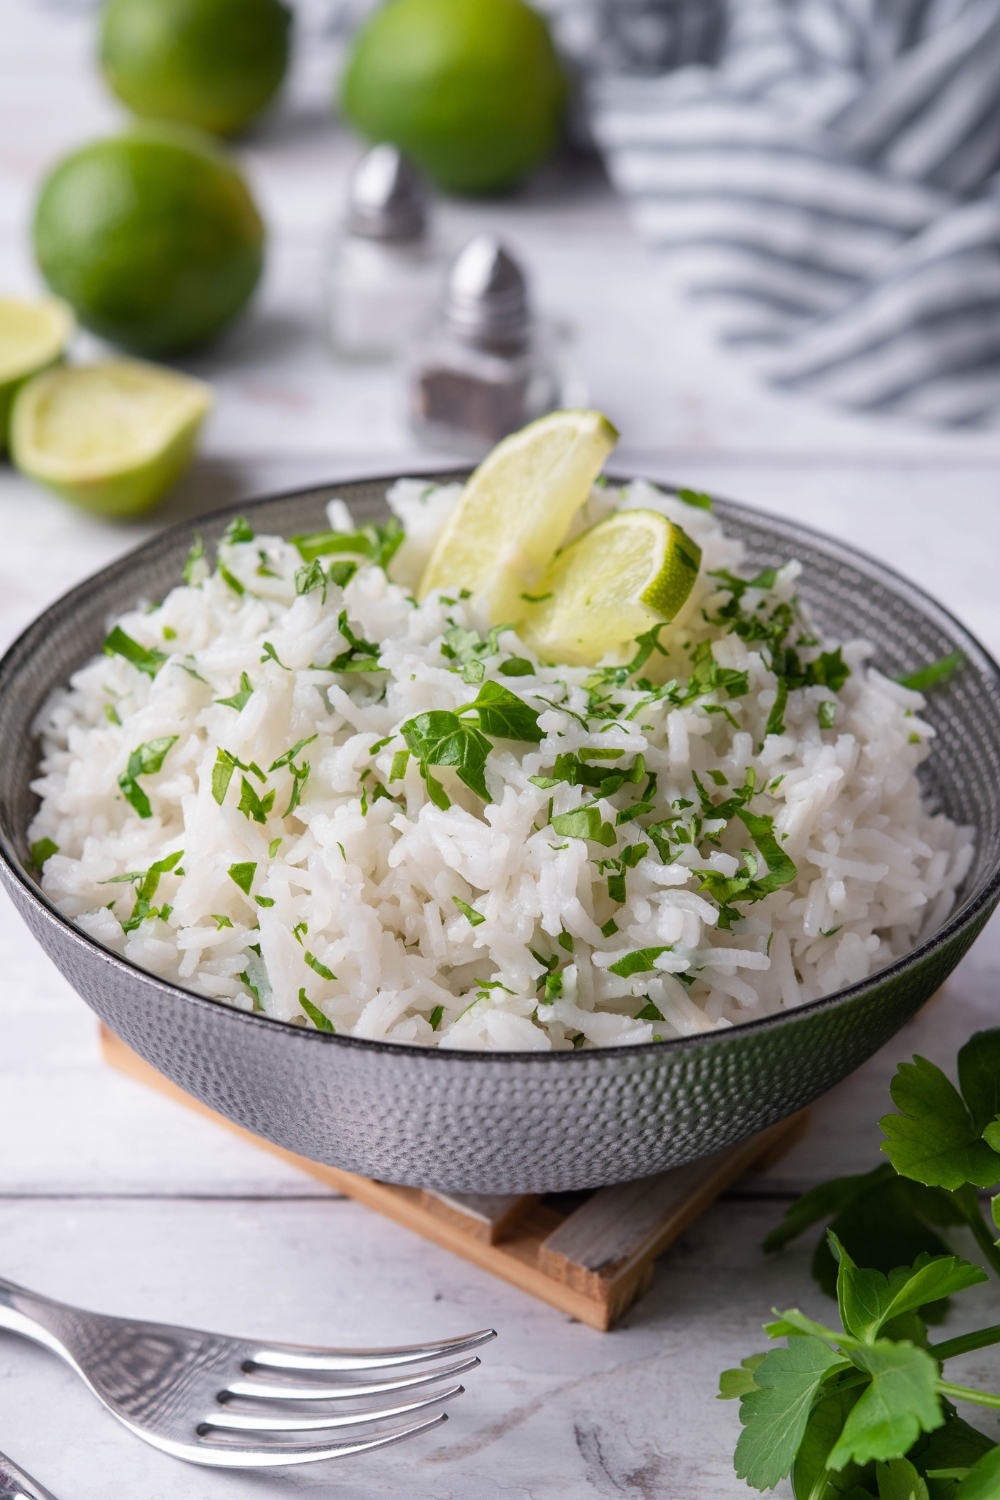 Two limes that are set on top of white rice in a bowl.